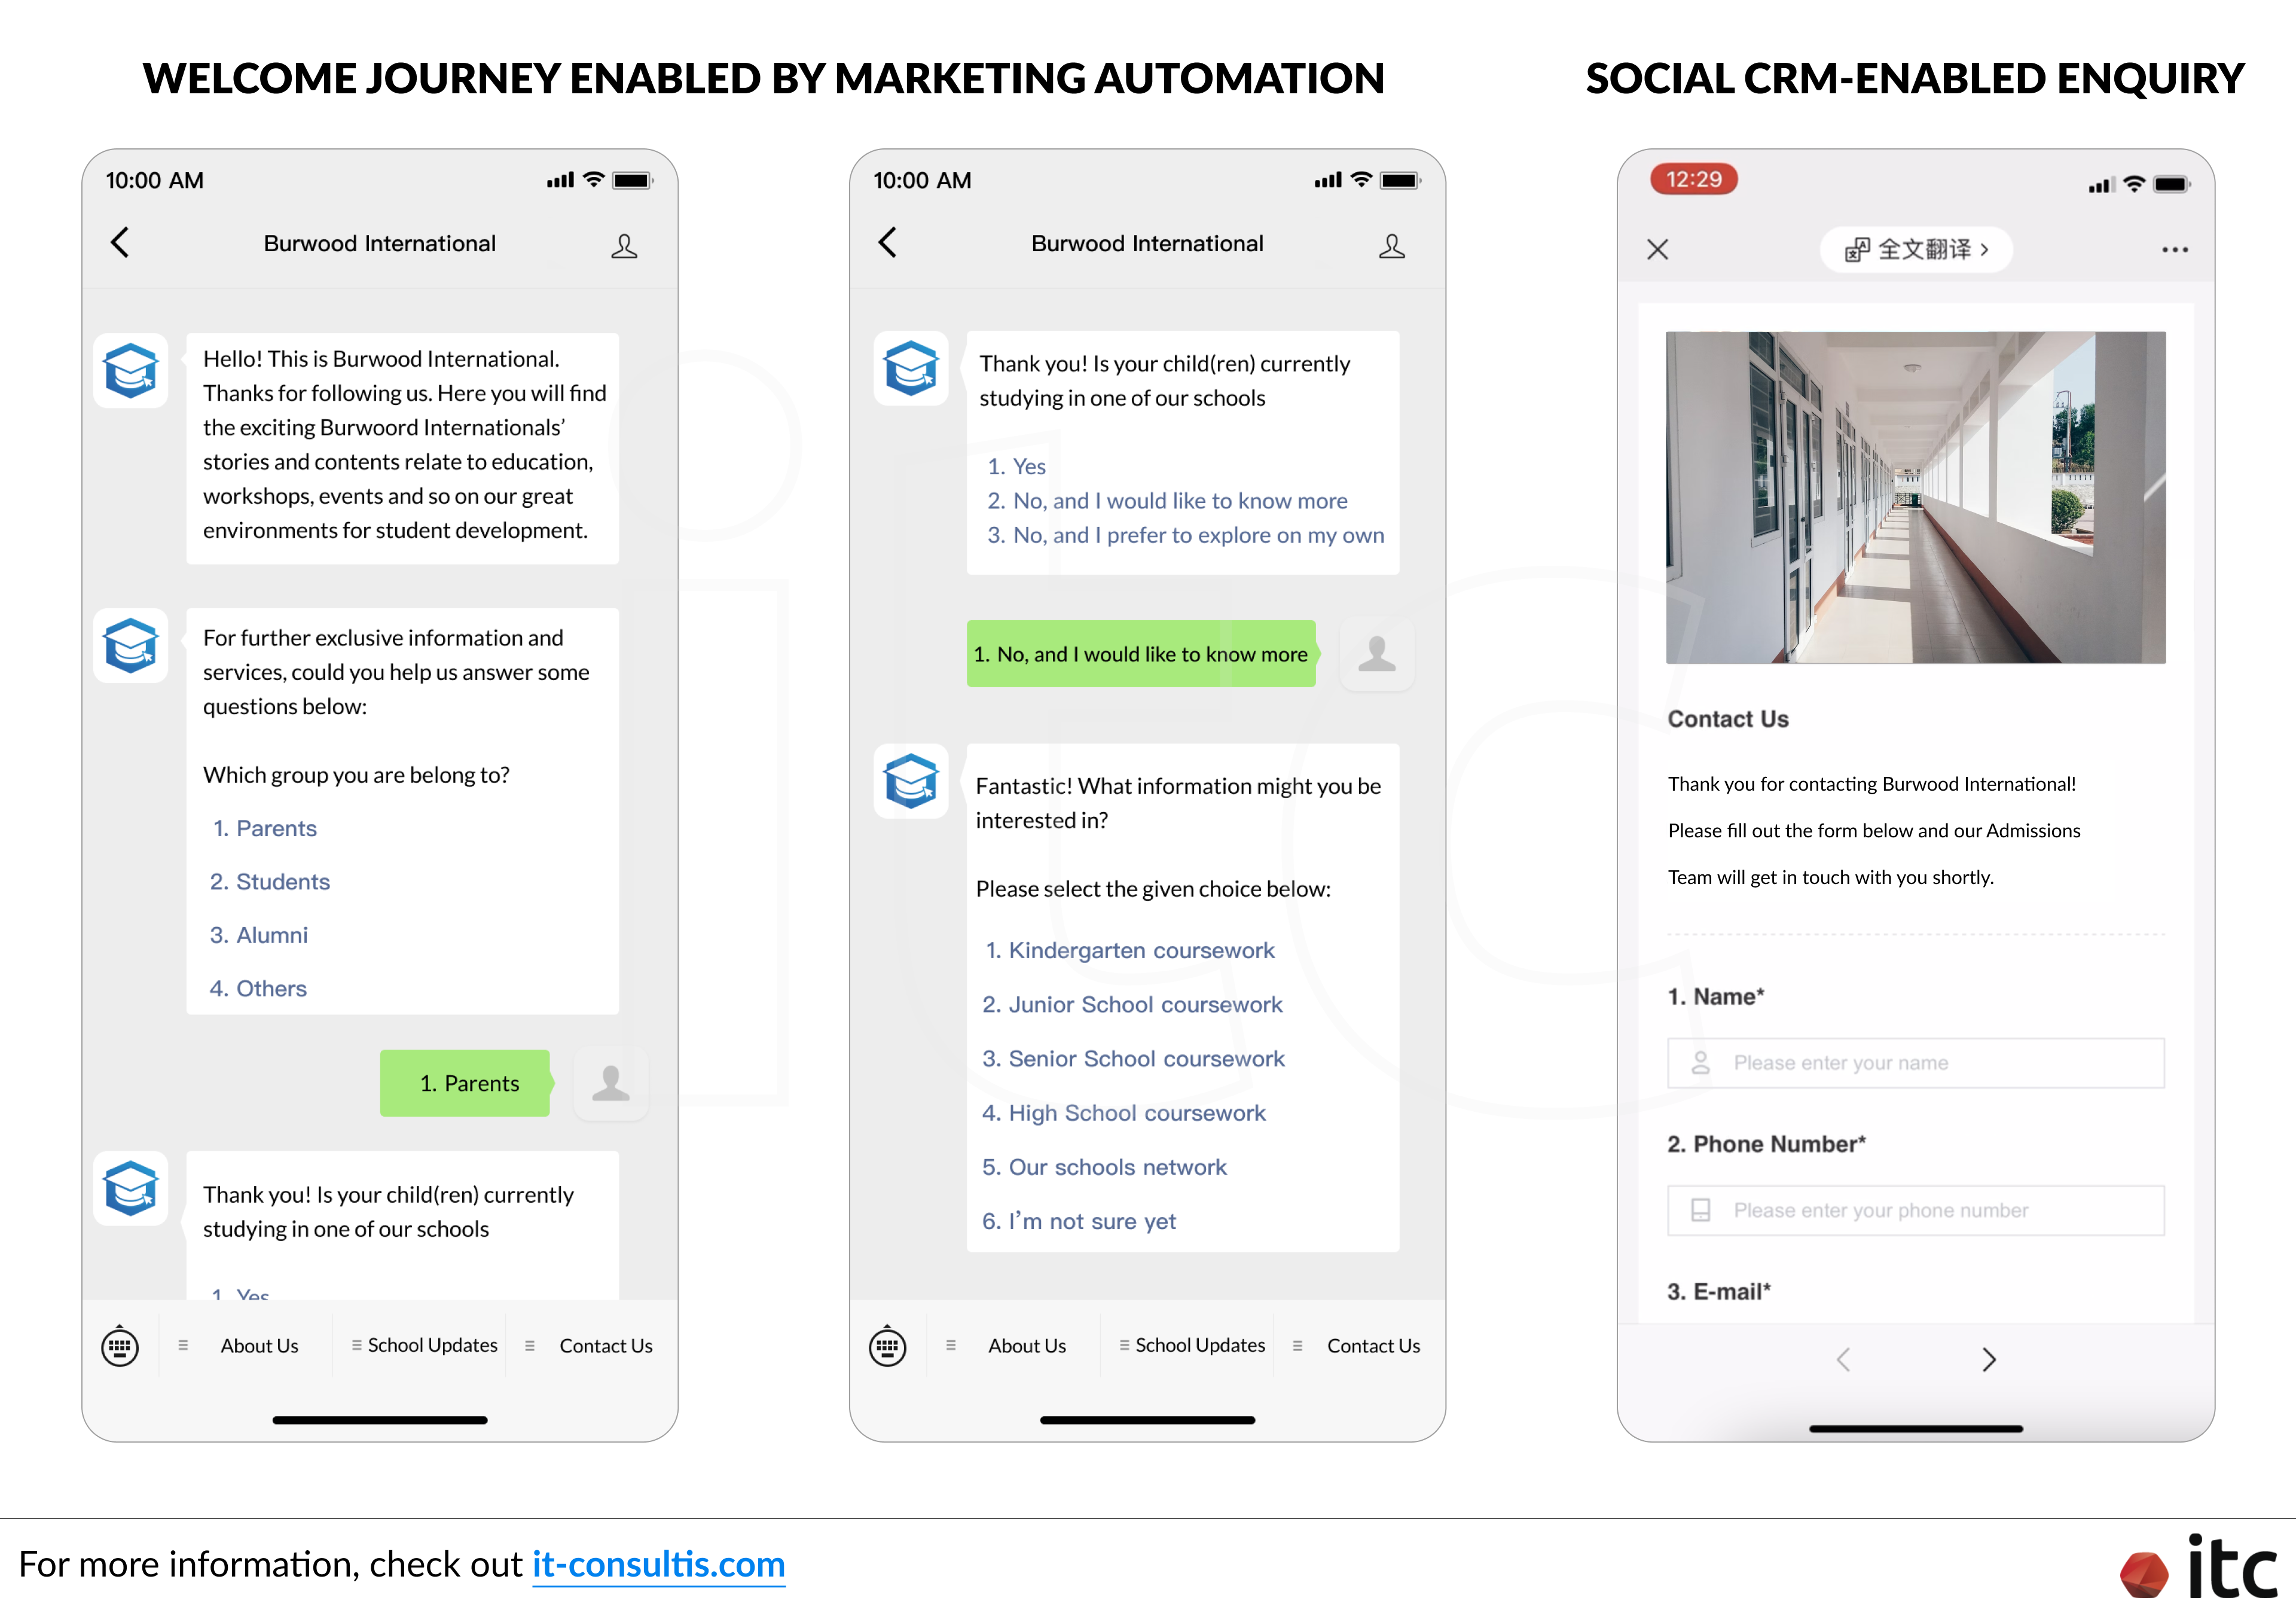  An example of the Welcome Journey enabled by Marketing Automation and Social CRM-enabled enquiry